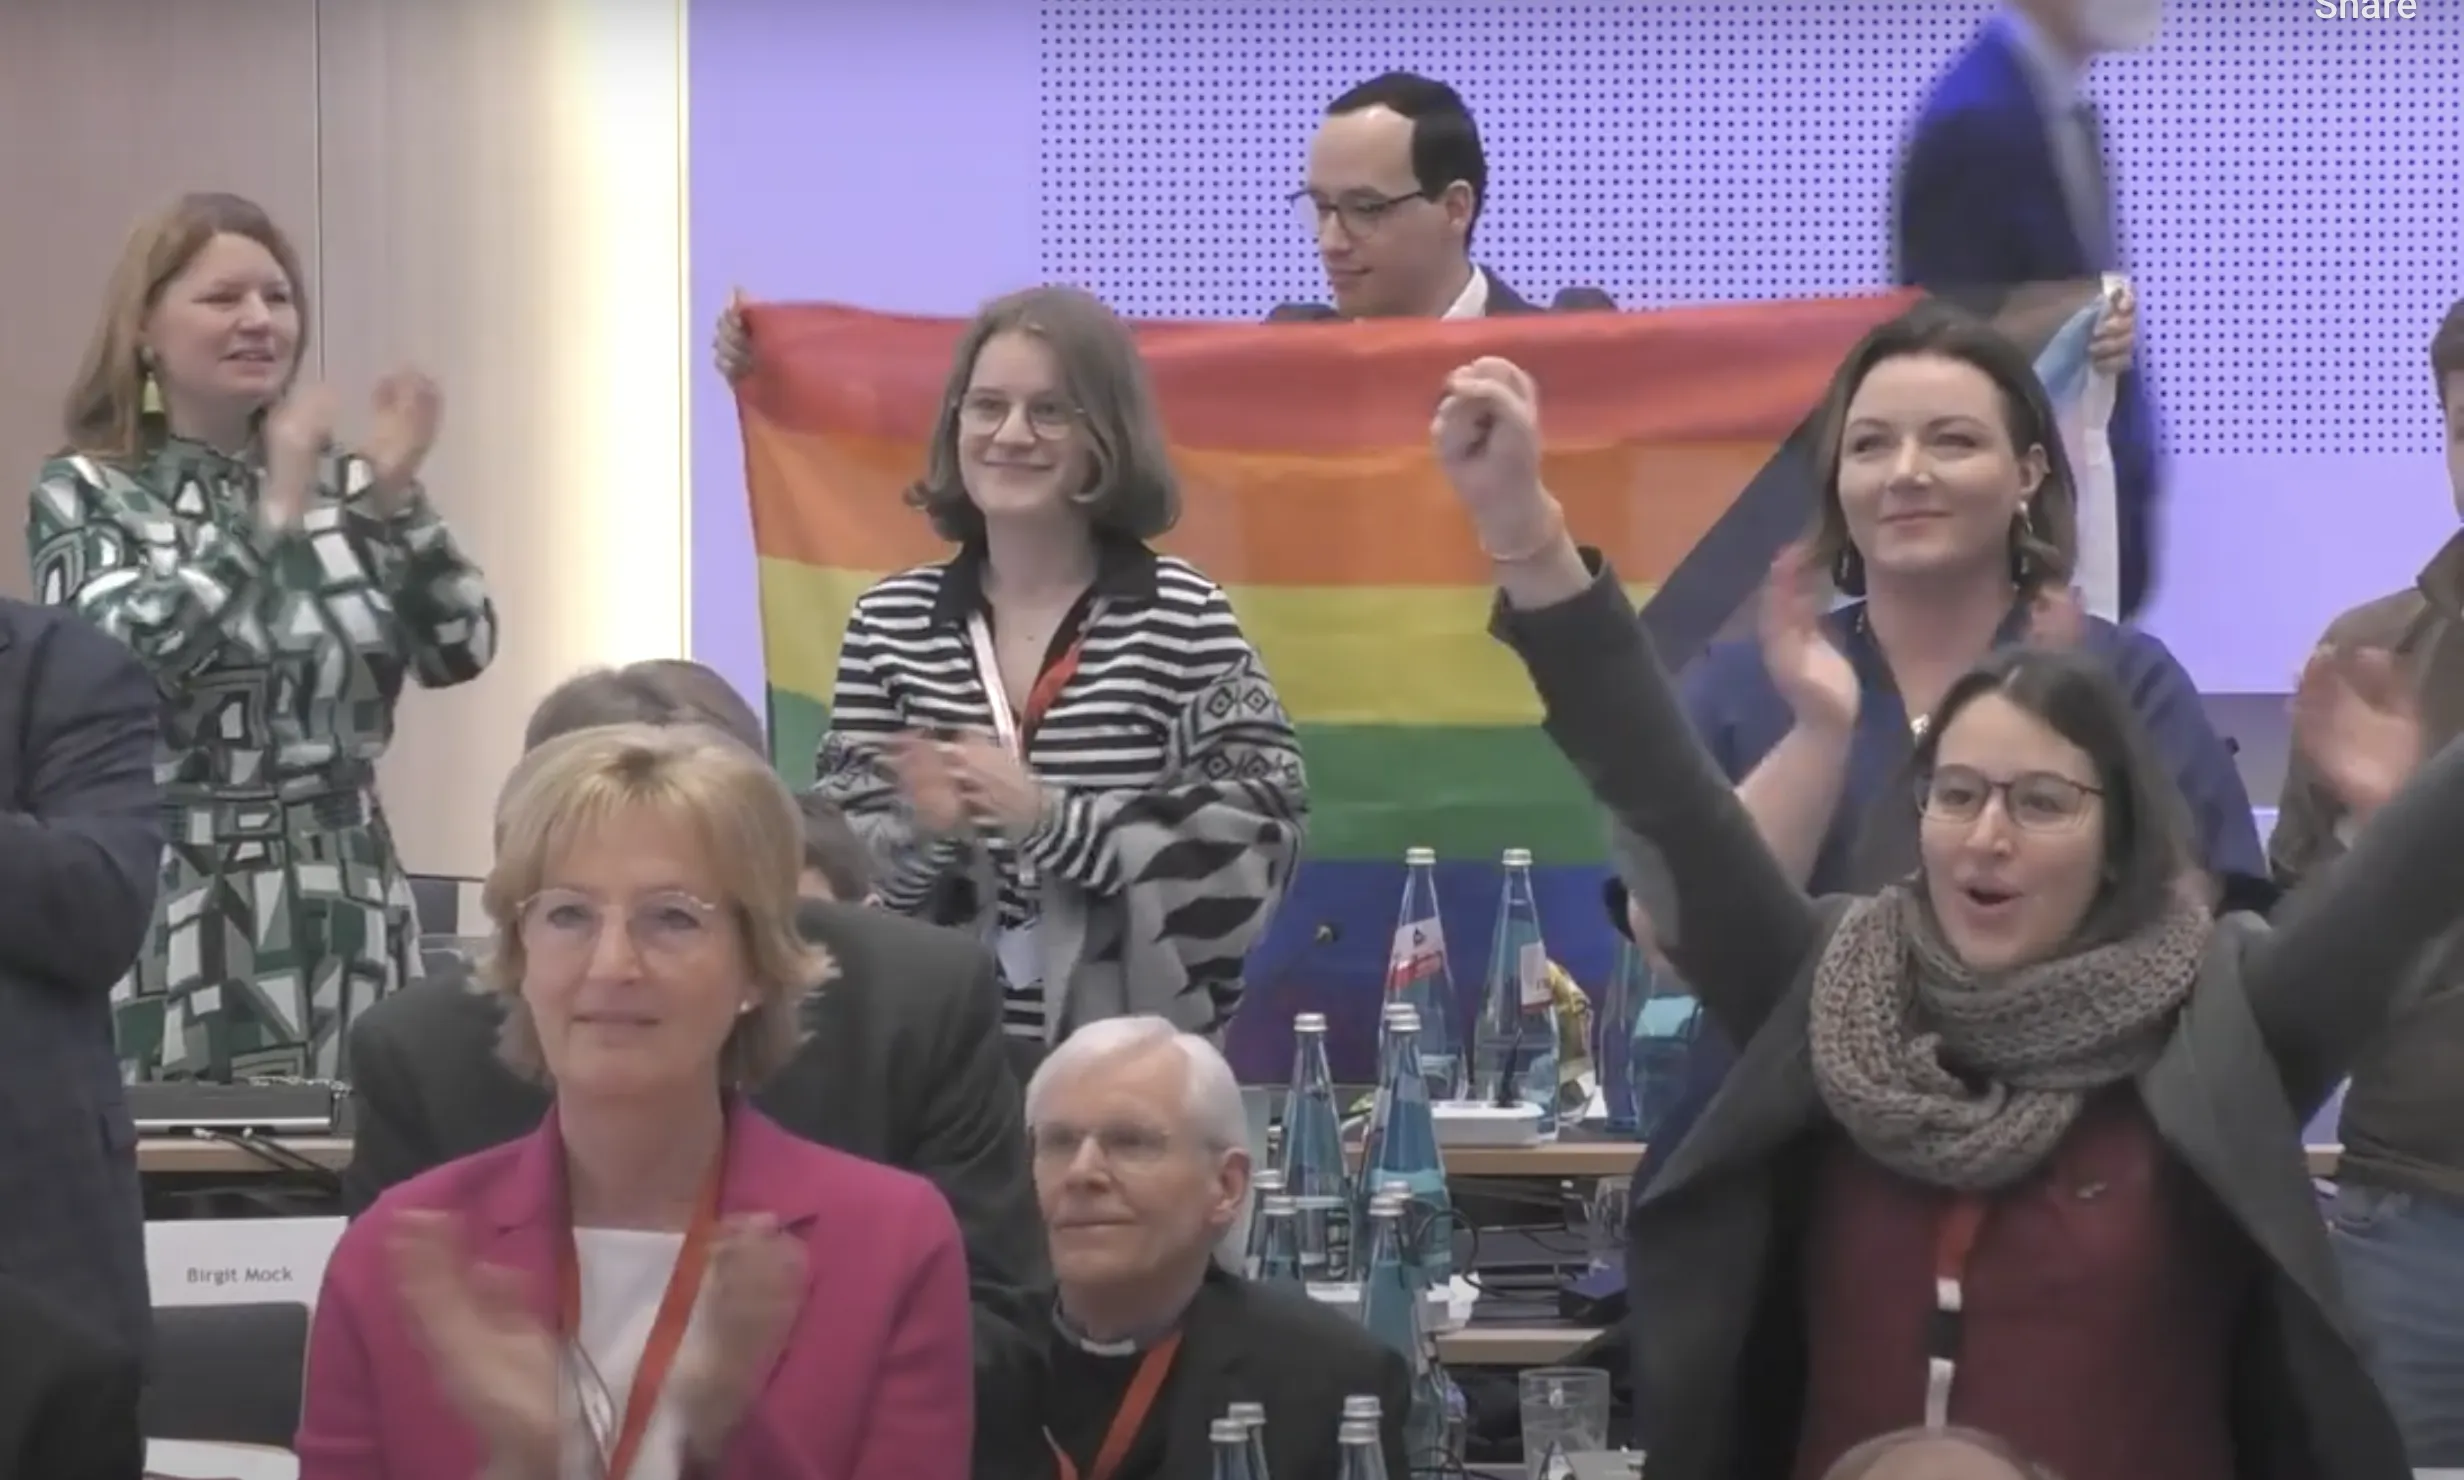 Delegates at the fifth assembly of the German Synodal Way, meeting in Frankfurt, Germany, on March 11, 2023, applaud after the he passage of a text calling for changes to the German Church's approach to gender identity.?w=200&h=150